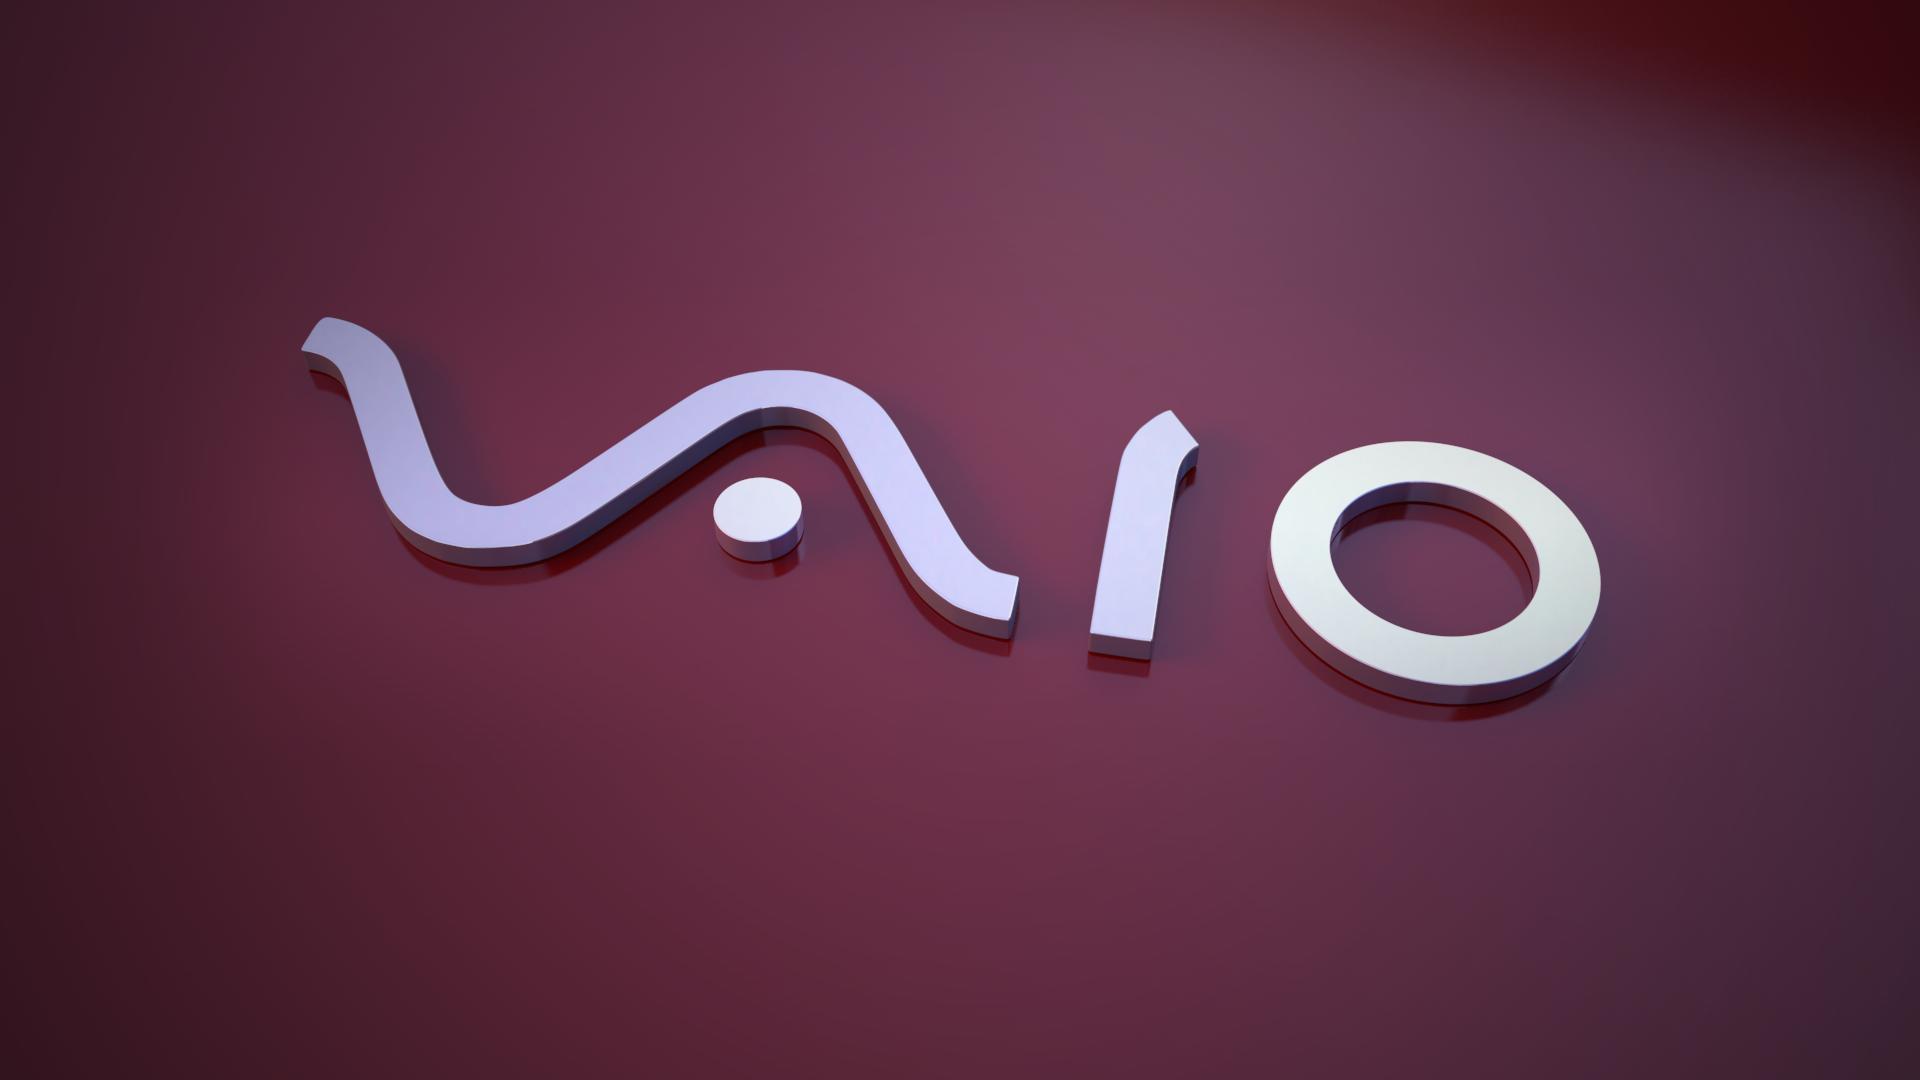 Sony Vaio Hd Wallpapers Top Free Sony Vaio Hd Backgrounds Wallpaperaccess